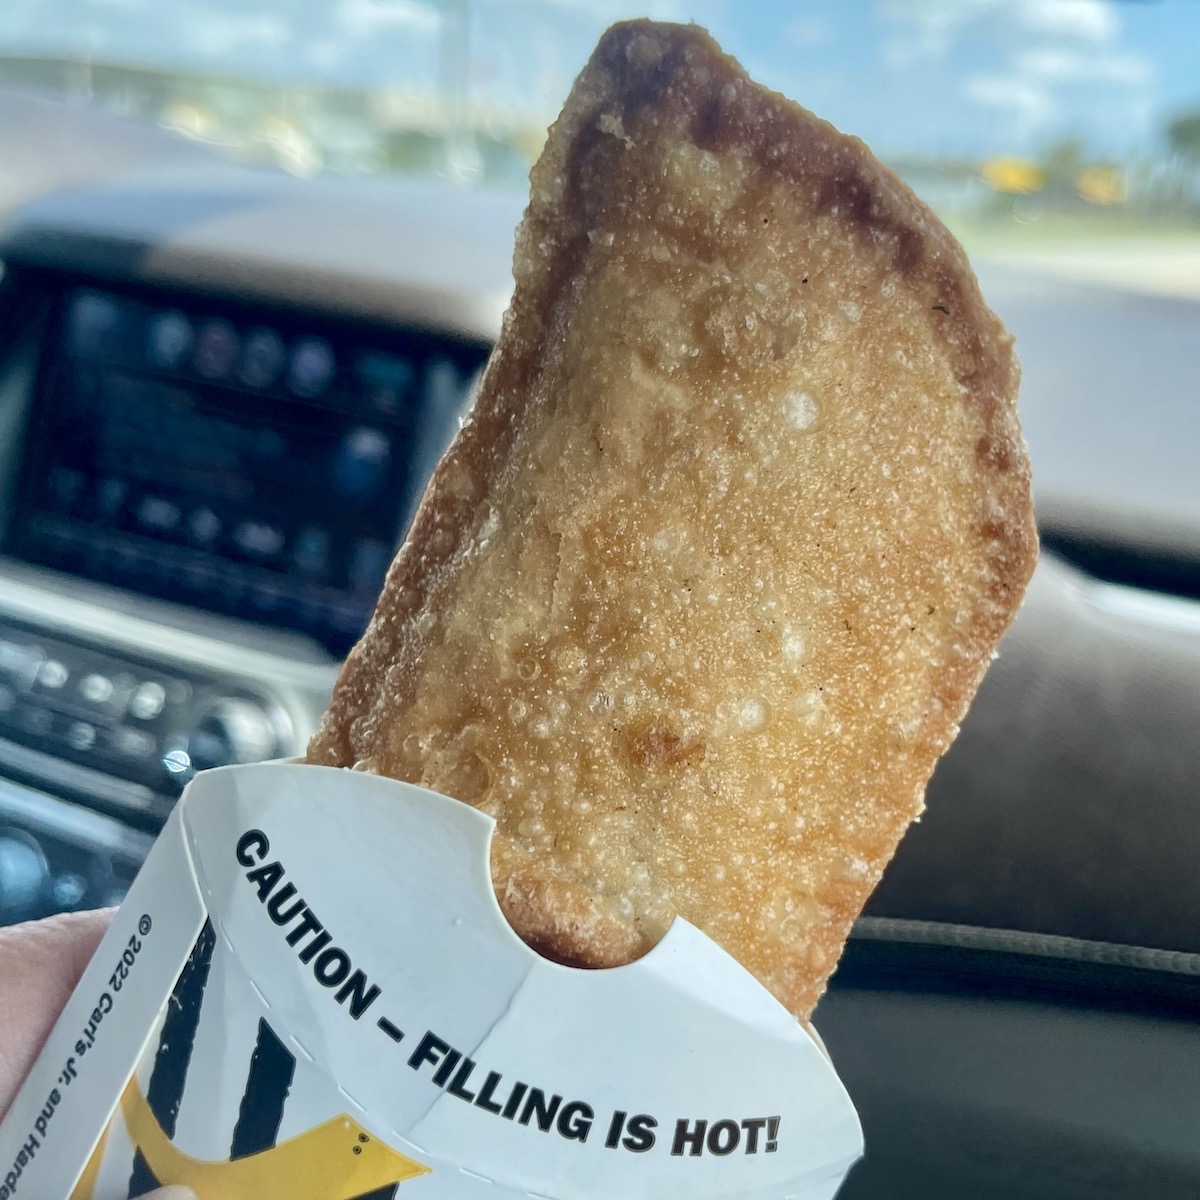 Fried Apple Turnover from Carl's Jr. in Doral, Florida